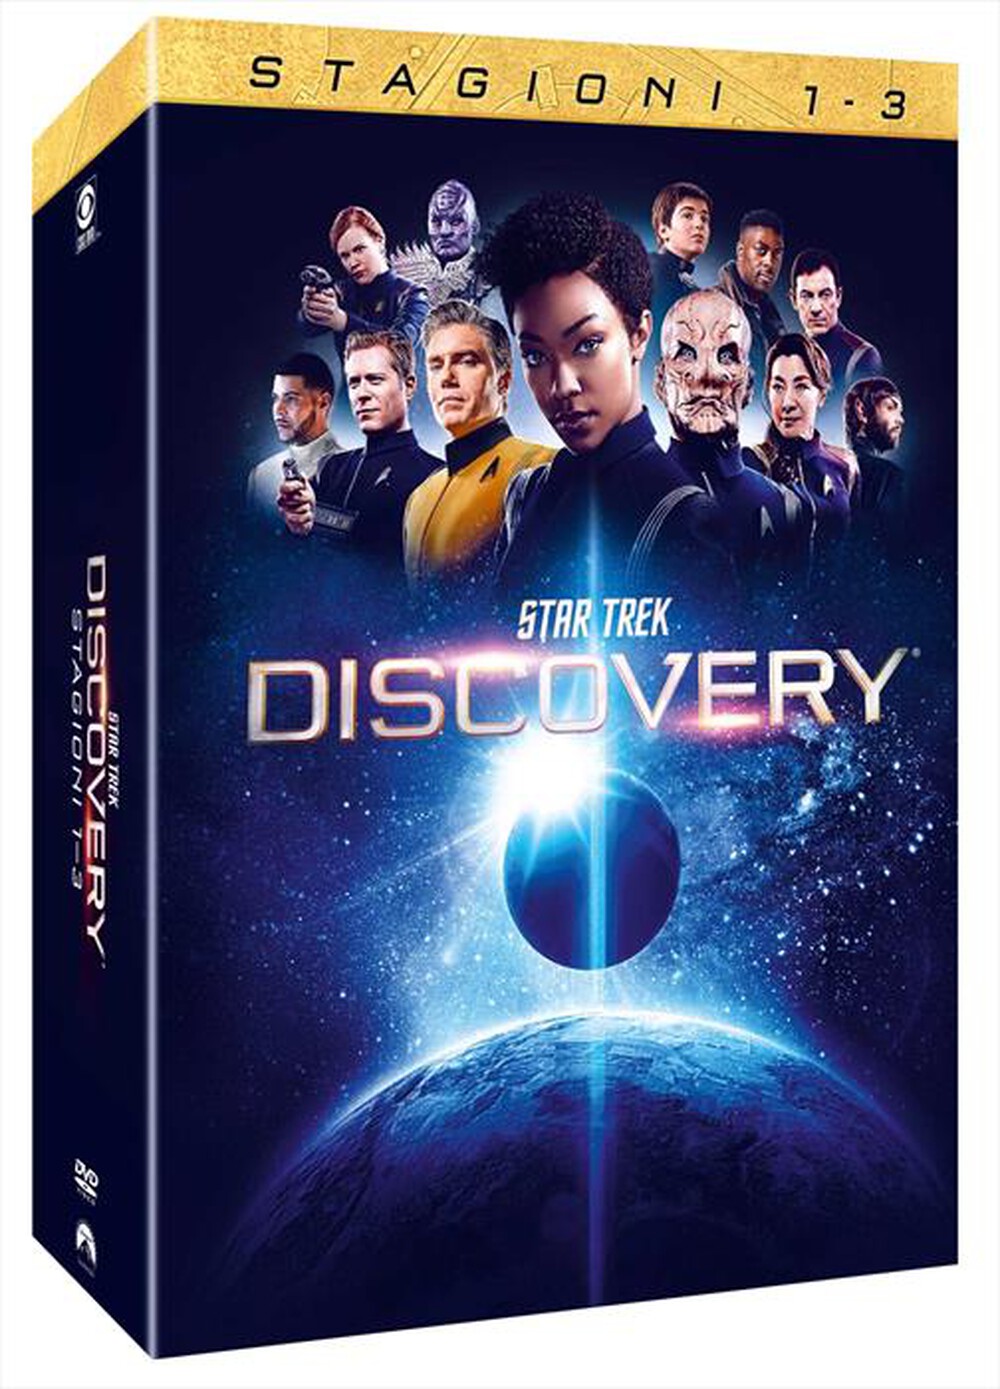 "PARAMOUNT PICTURE - Star Trek: Discovery - Stagione 01-03 (15 Dvd)"